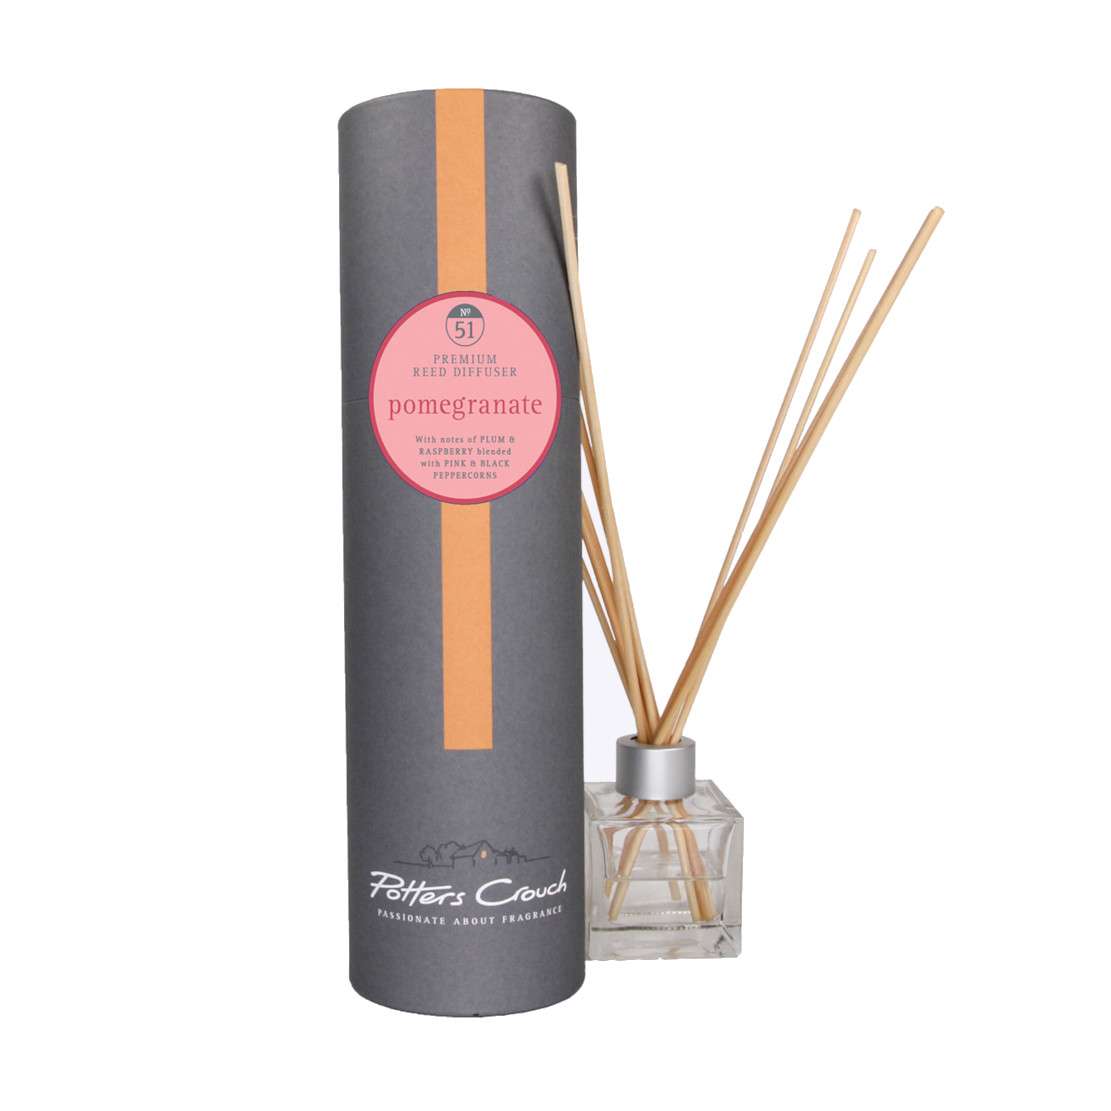 Potters Crouch Pomegranate Diffuser 100ml